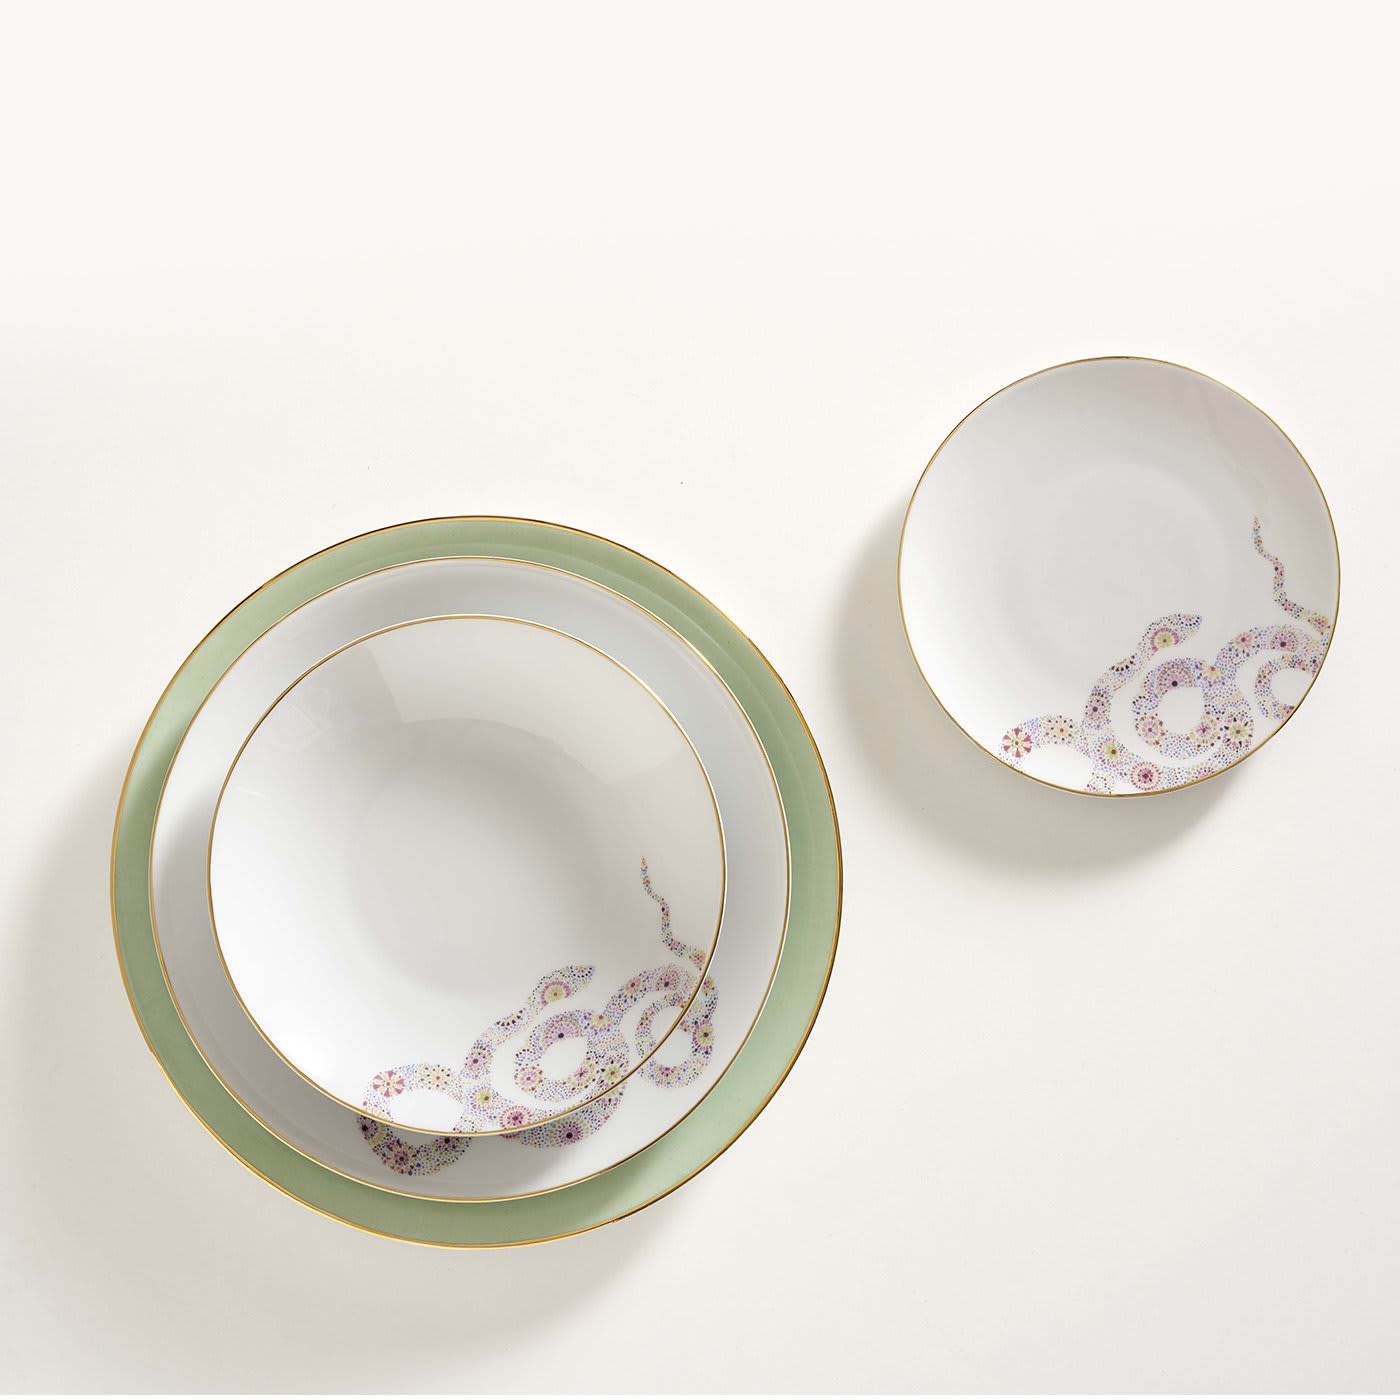 Moroccan Snake Set of Three Porcelain Dishes - Dalwin Designs